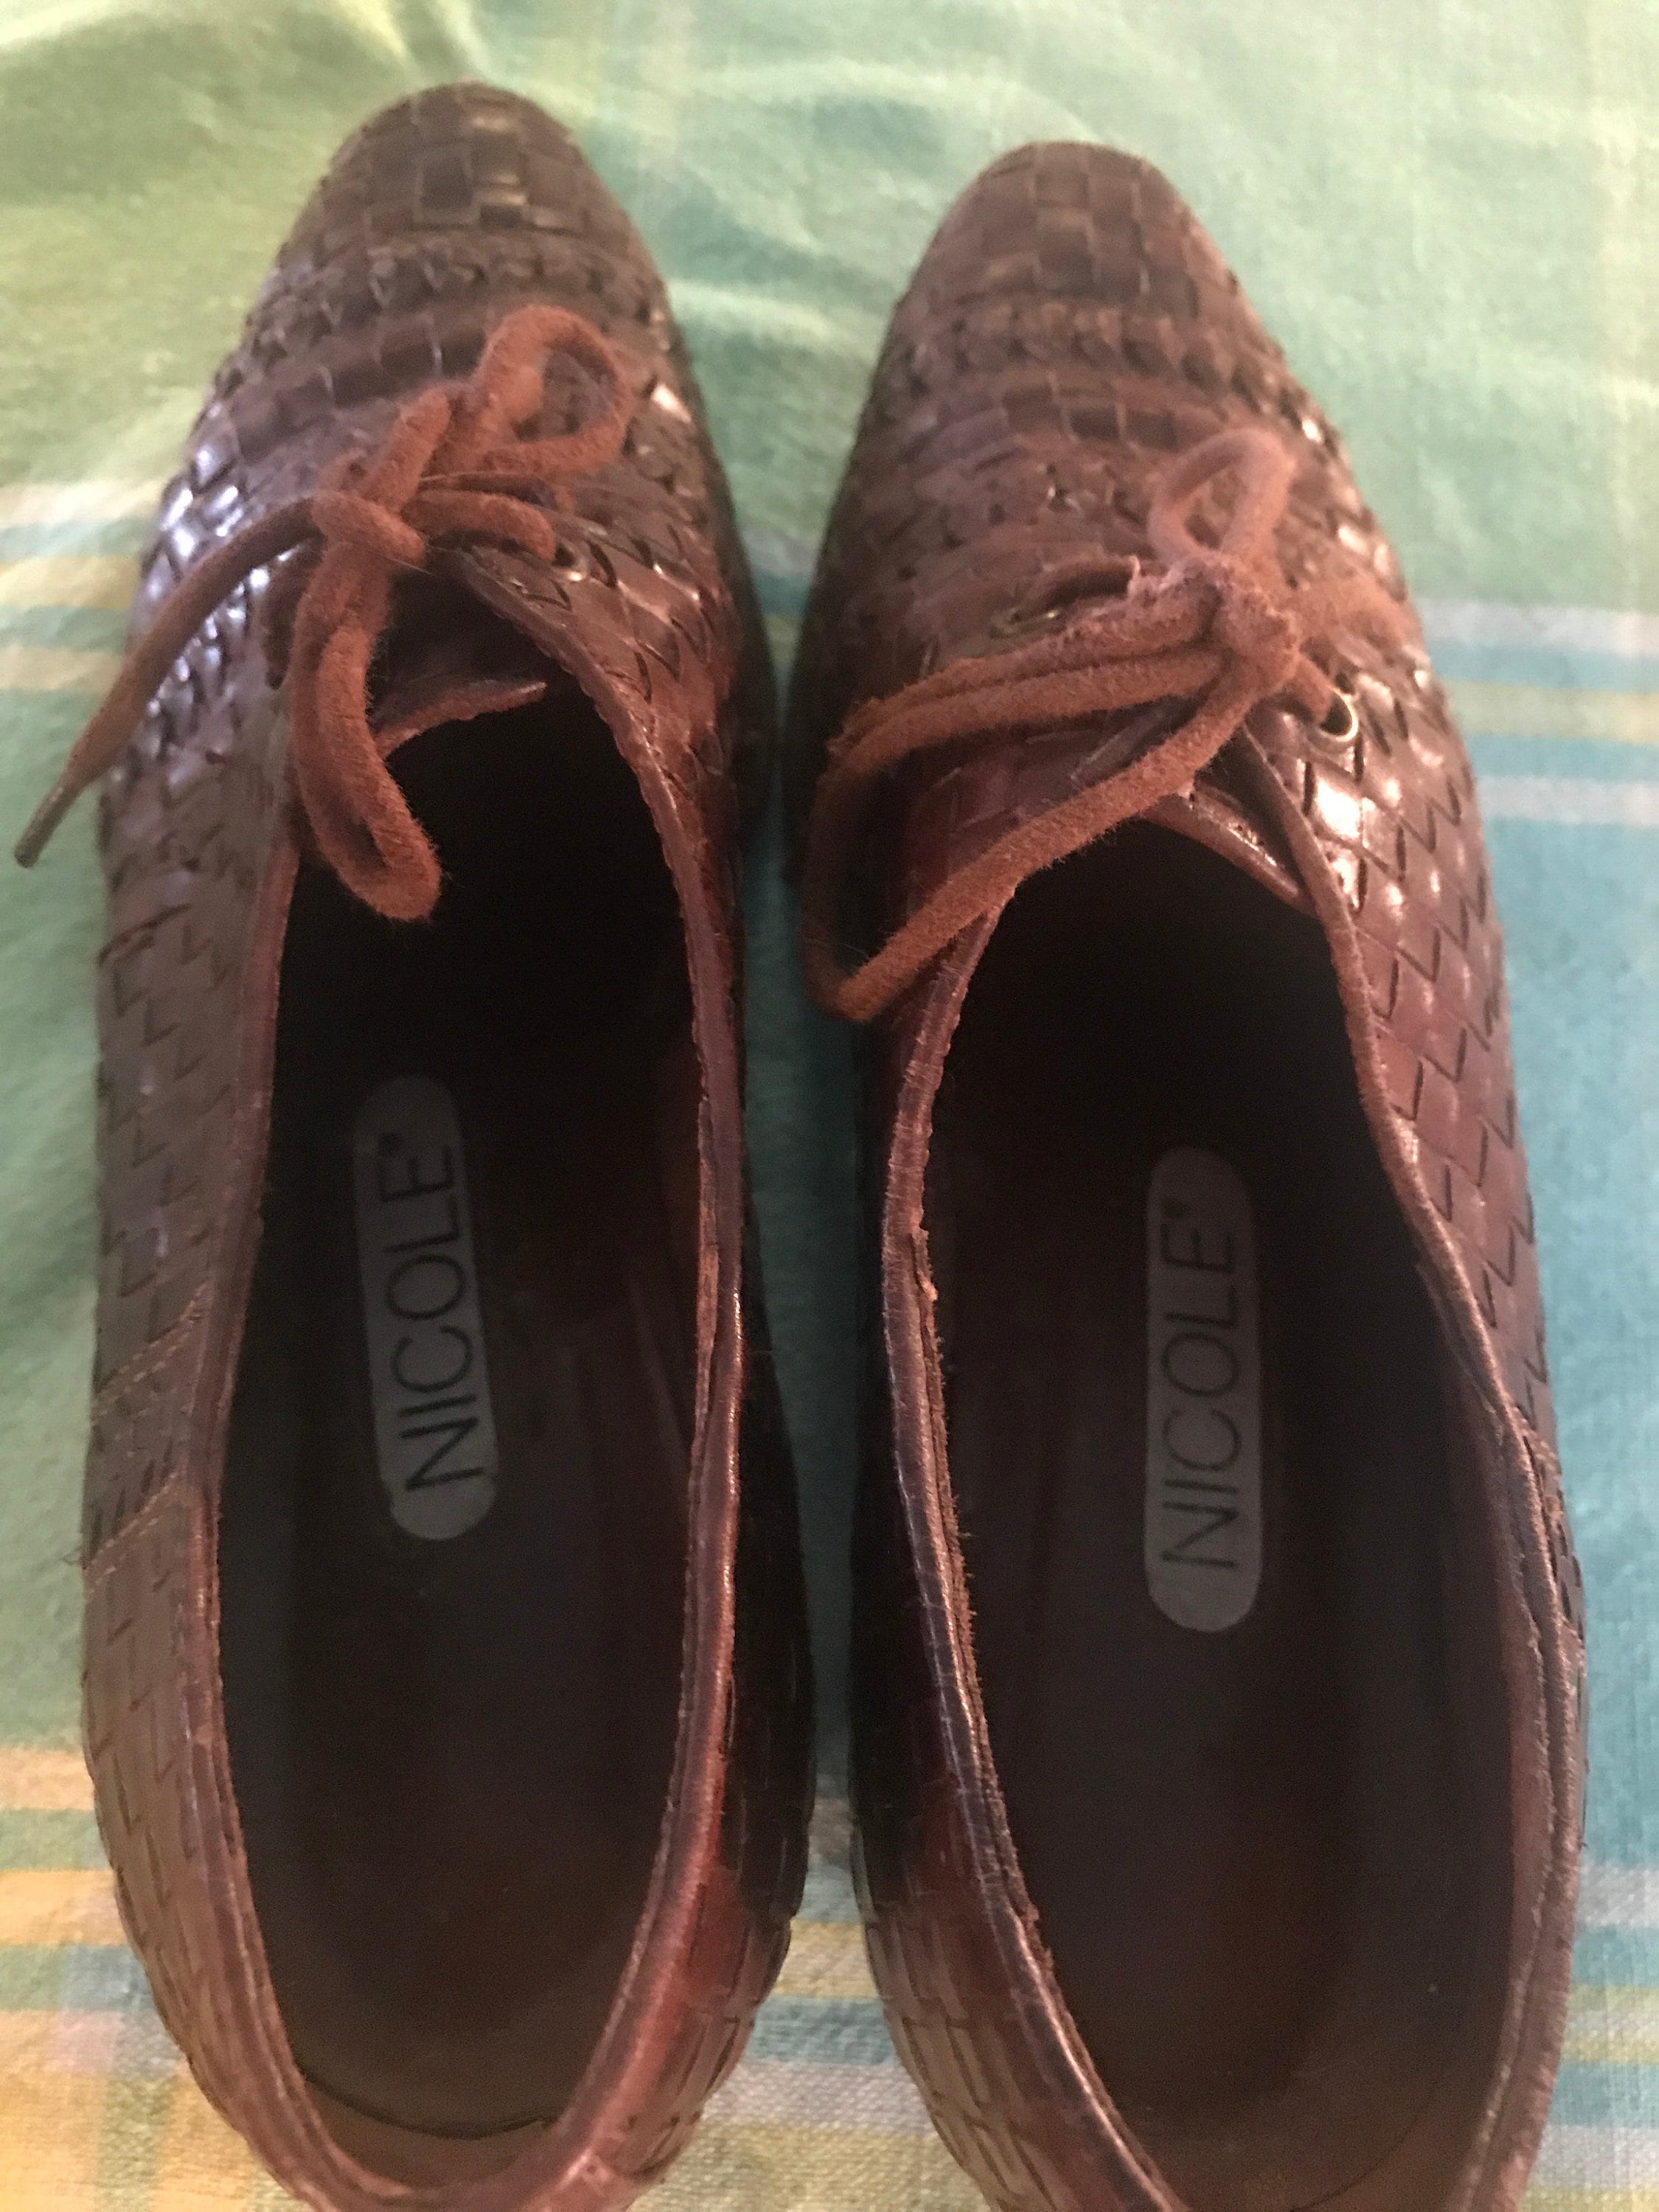 Vintage Woven Nicole Shoes. Brown Lace Up Oxford Woven Shoes. Brown ...